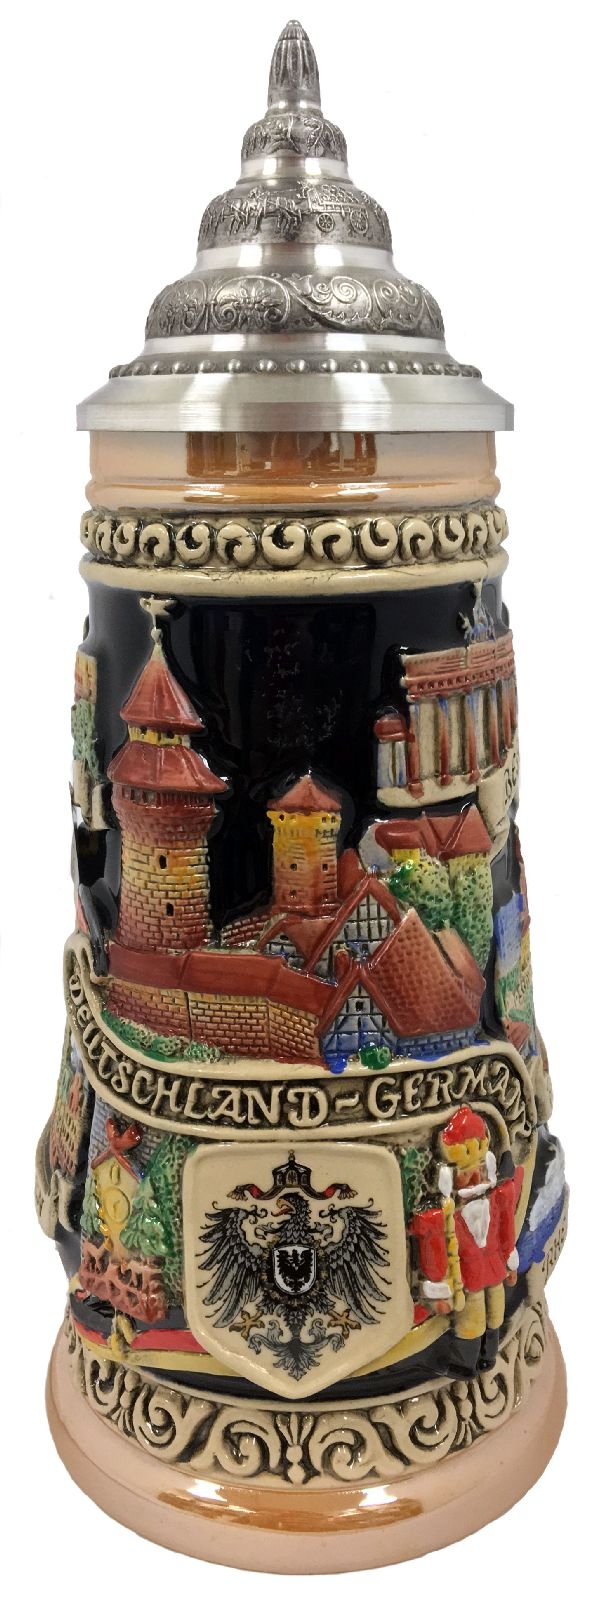 Deutschland Germany Painted City Landscapes Gift Boxed LE German Beer Stein .5 L